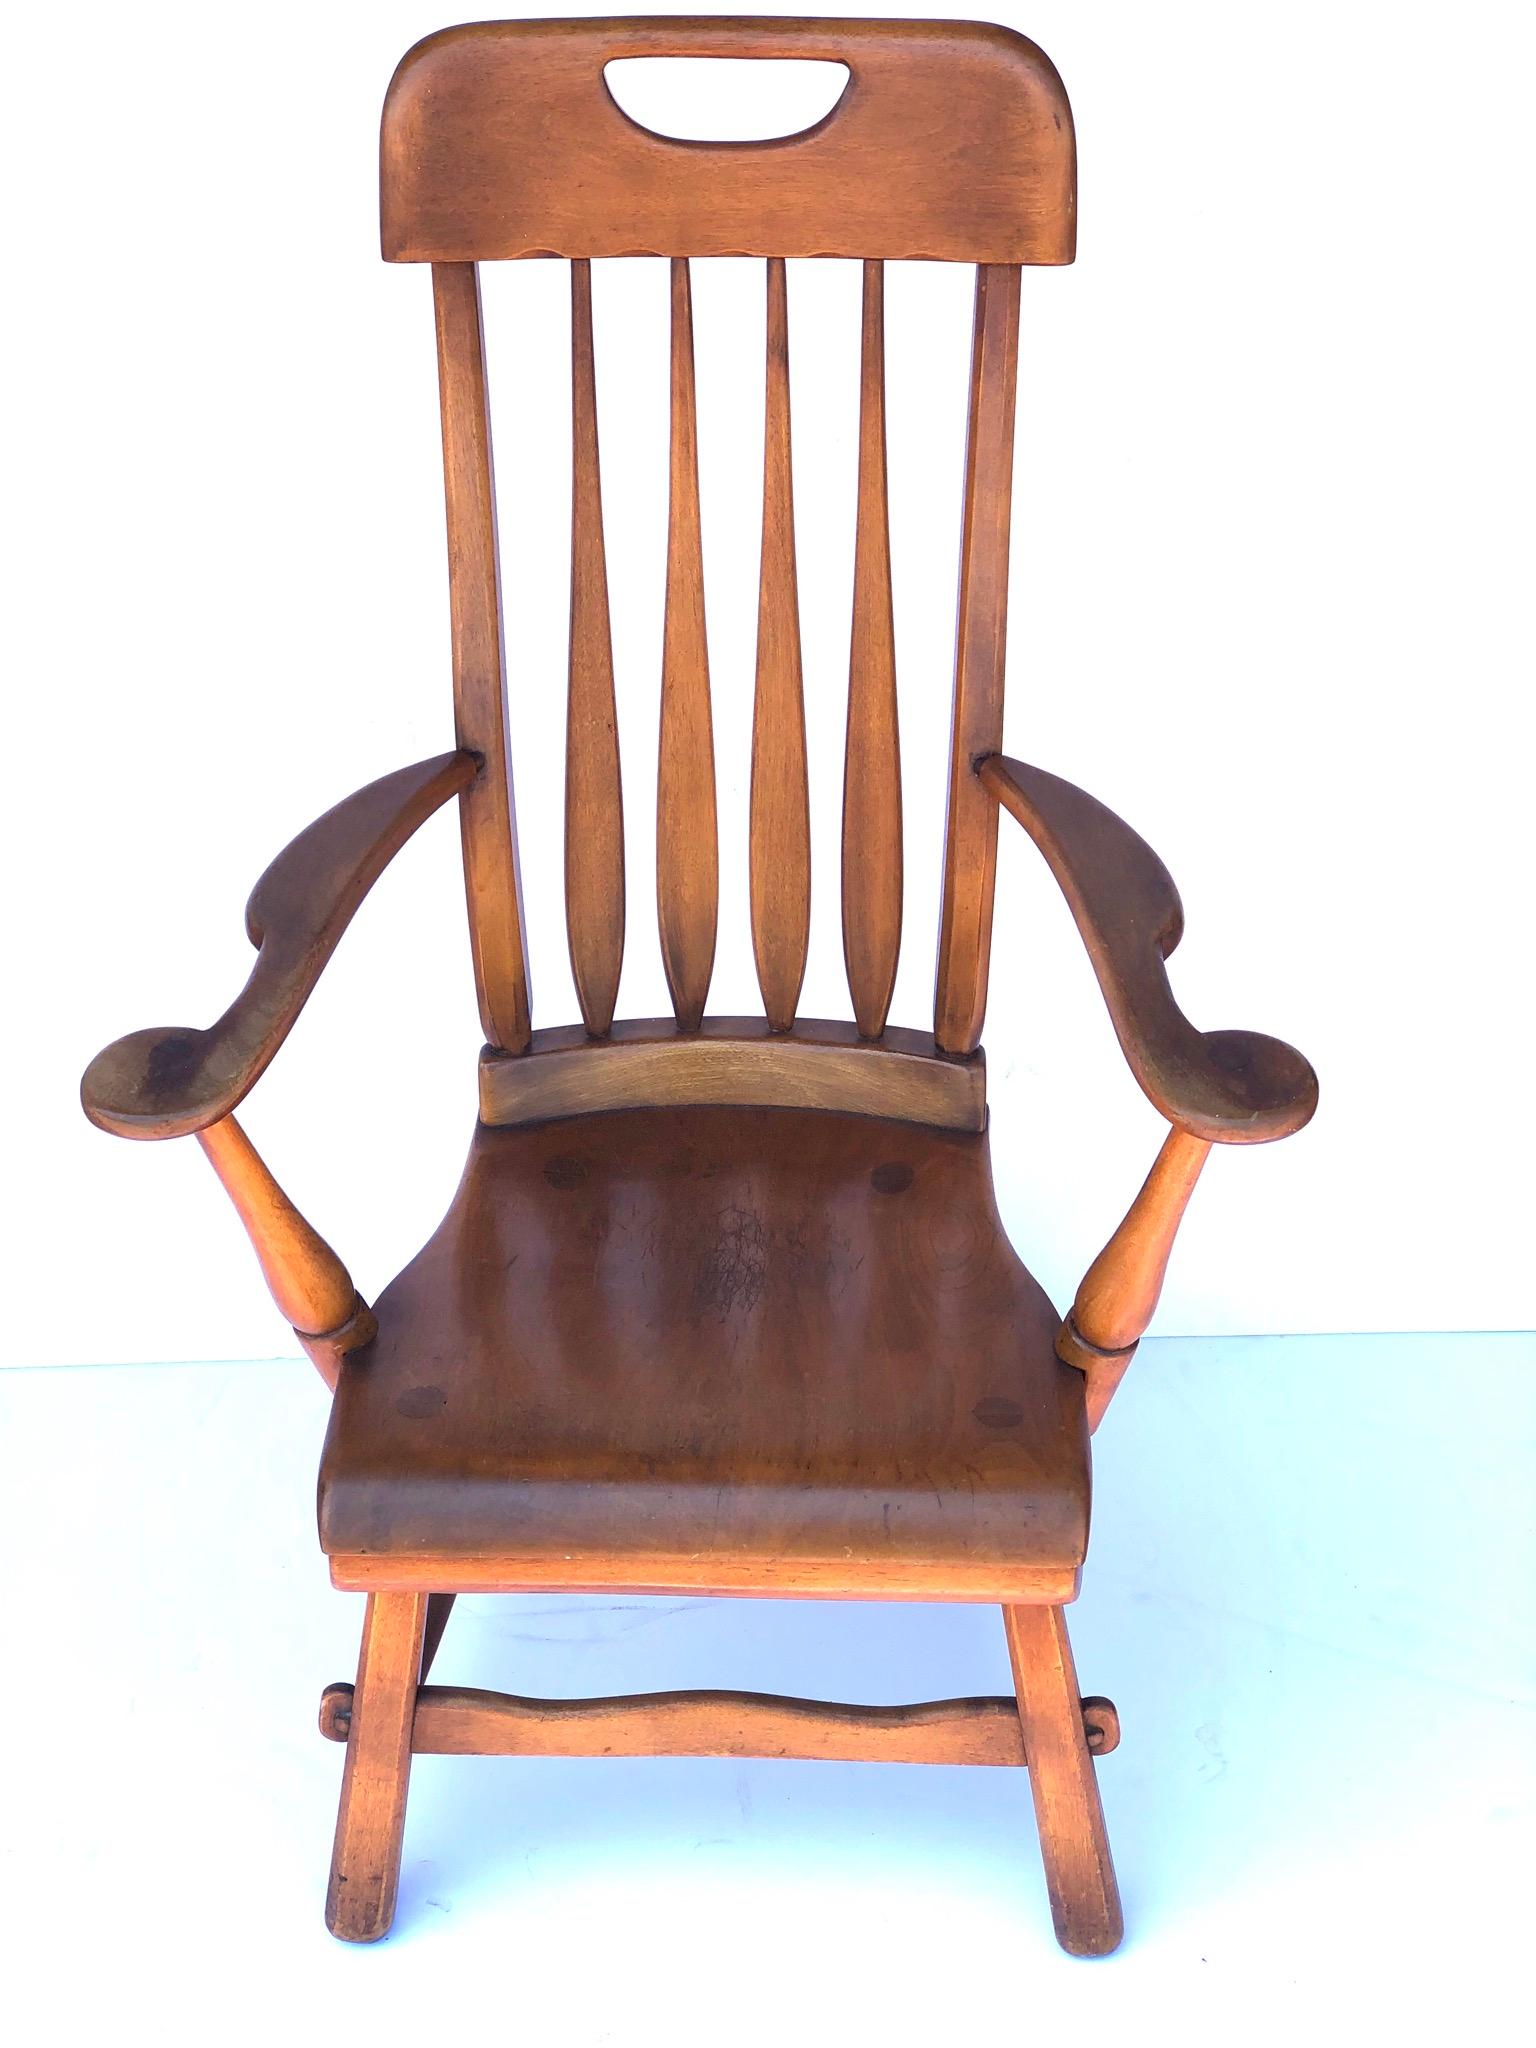 sikes chair company